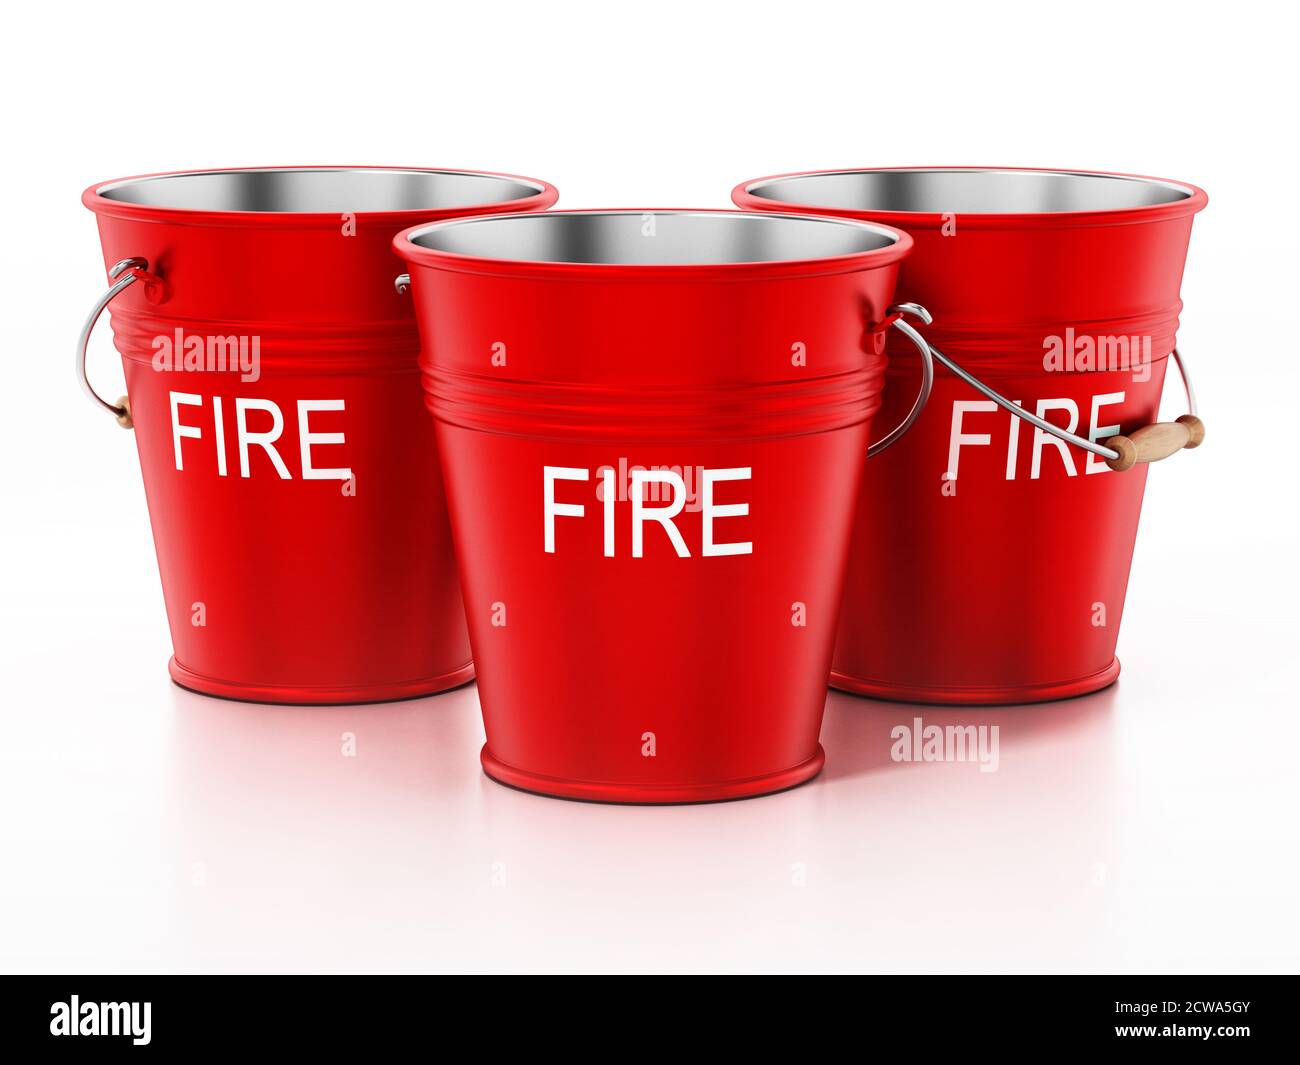 Vintage fire buckets Cut Out Stock Images & Pictures - Alamy